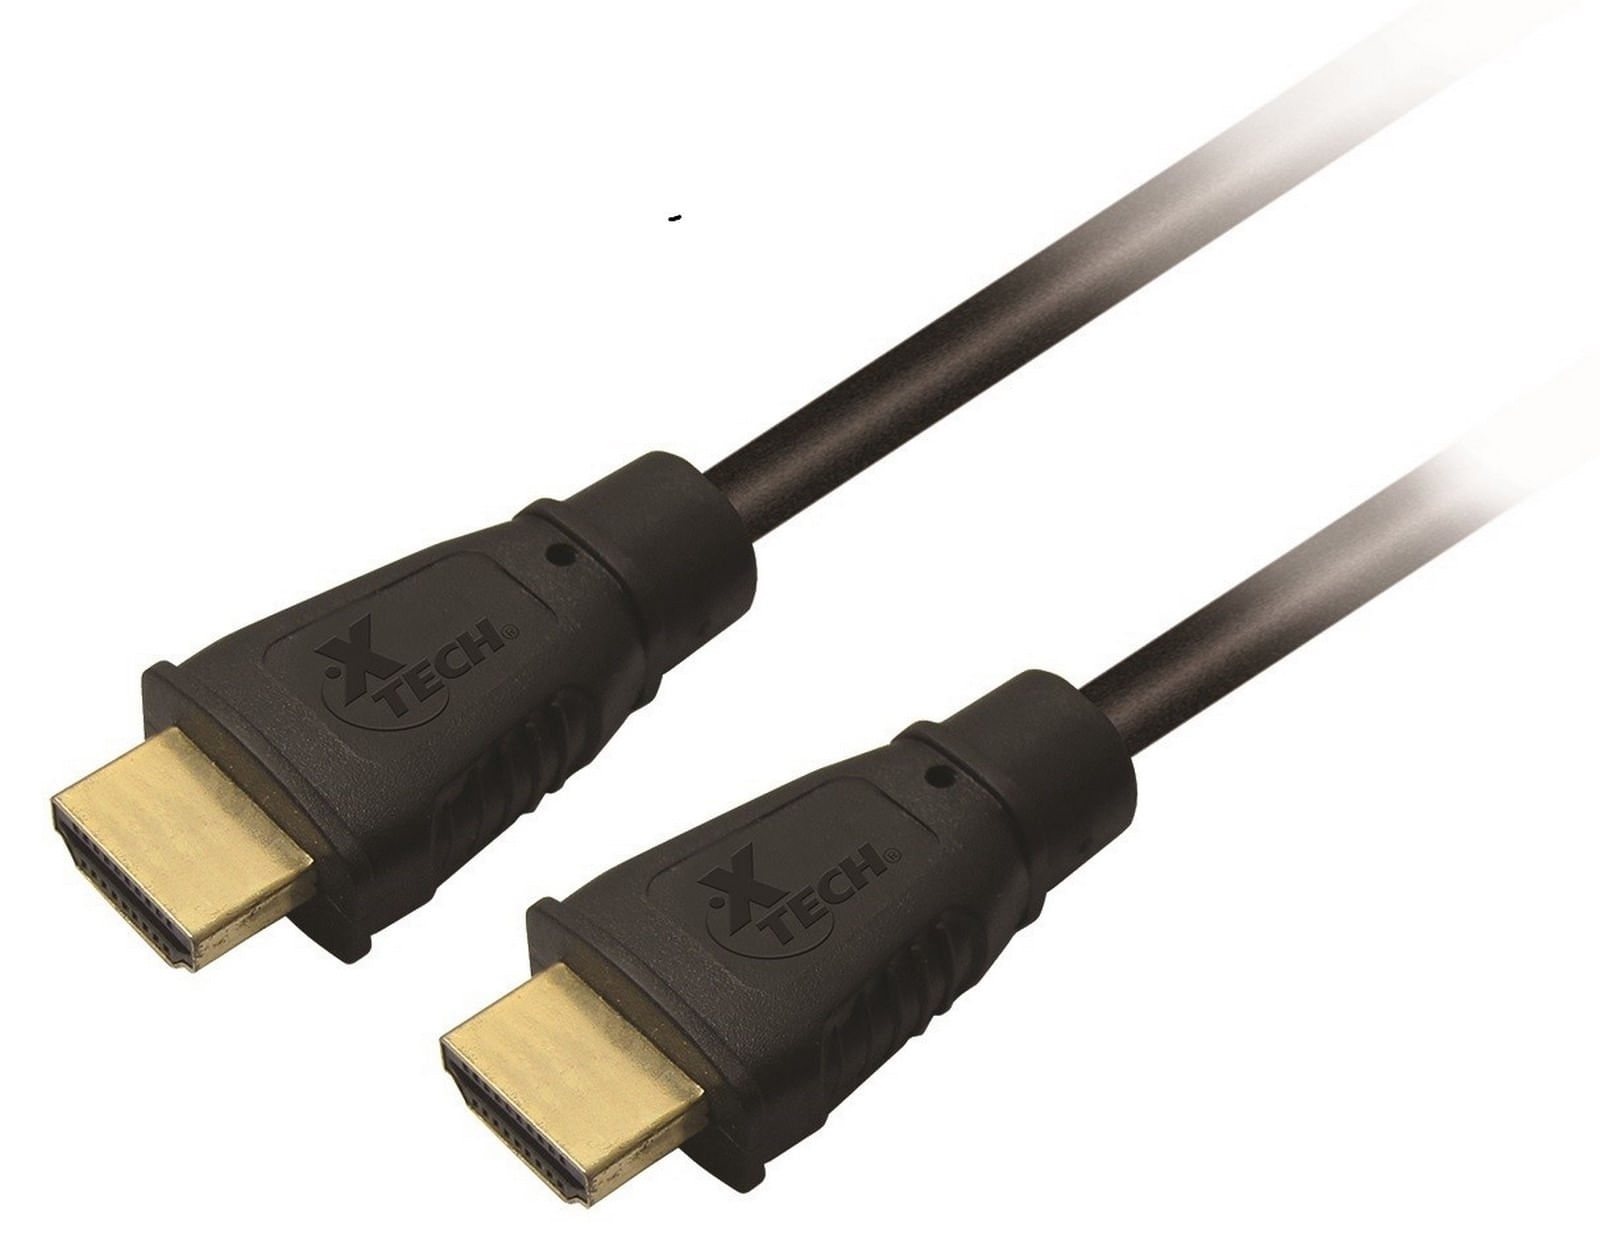 Cable HDMI Xtech male to HDMI male 1.8 metros - XTC-311